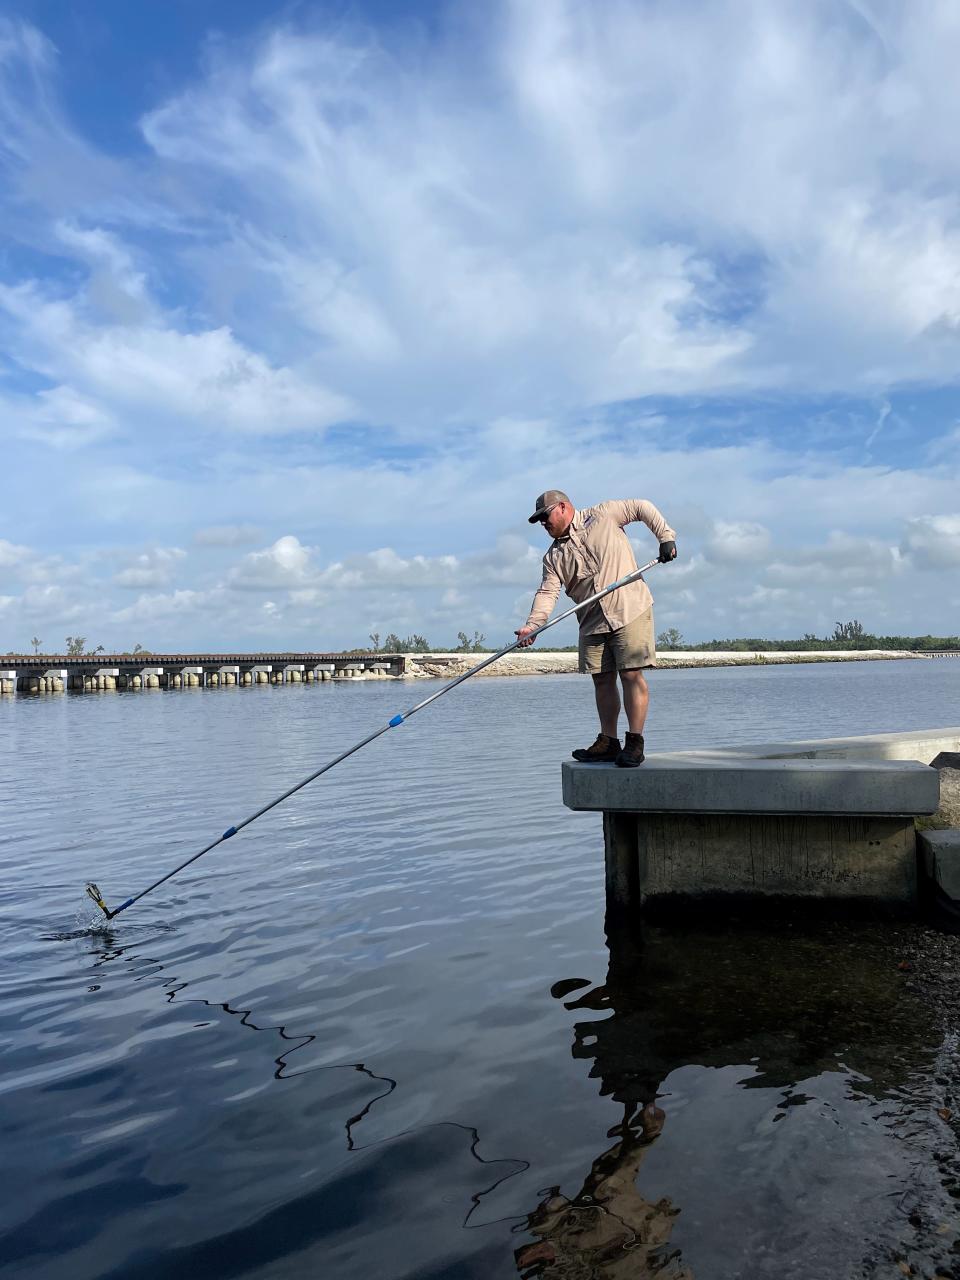 Calusa Waterkeeper Codty Pierce samples the Caloosahatchee for fecal bacteria in east Fort Myers. His nonprofit has been monitoring area waterways for signs of trouble for years - and often finds them.